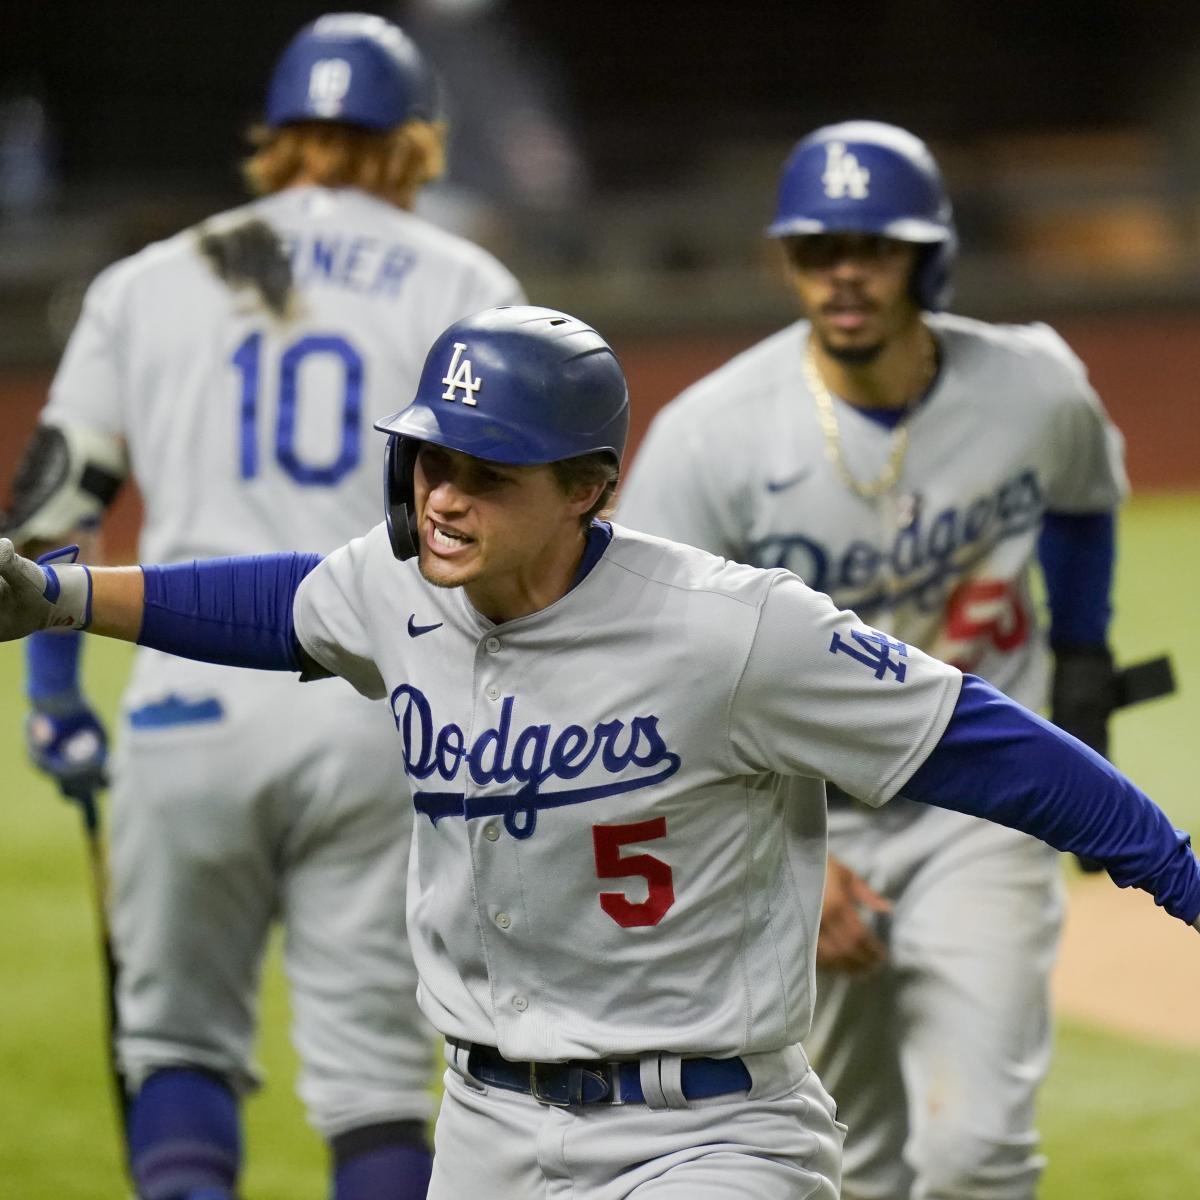 Dodgers Safe Unusual Life in Uphill NLCS Battle with Season-Saving Game 5 Retract